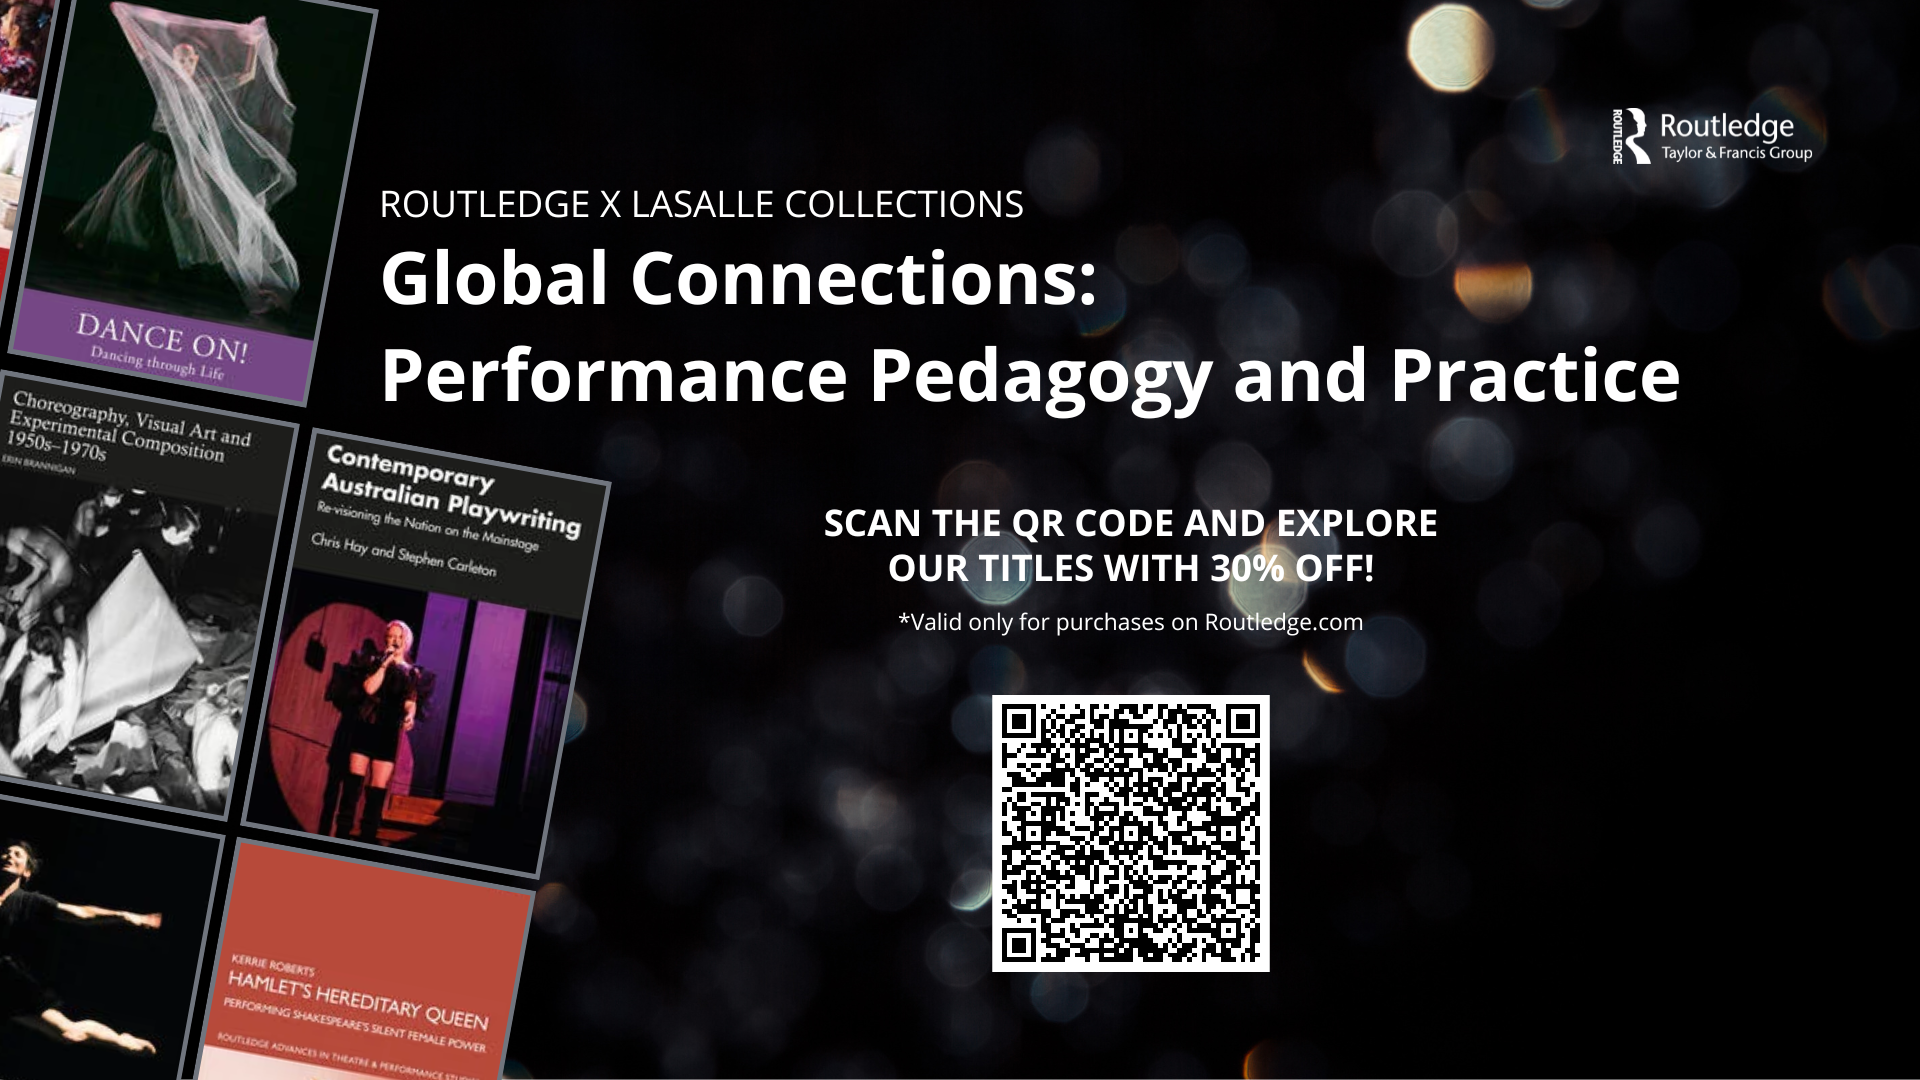 Routledge and LASALLE Global Connections: Performance Pedagogy and Practice promo